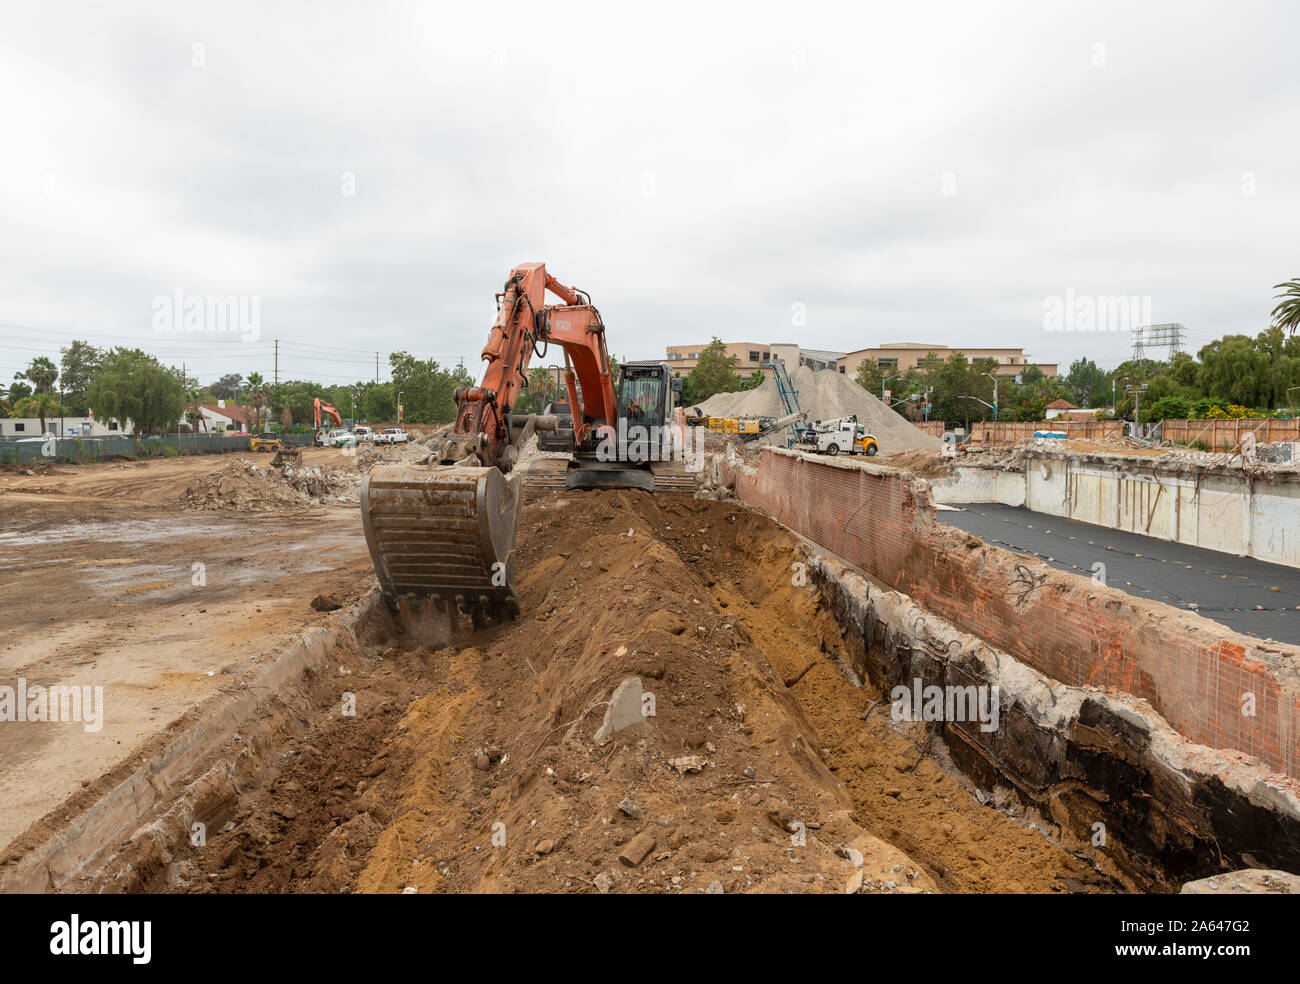 Hitachi excavator digging at construction site, Old Town, San Diego, California Stock Photo